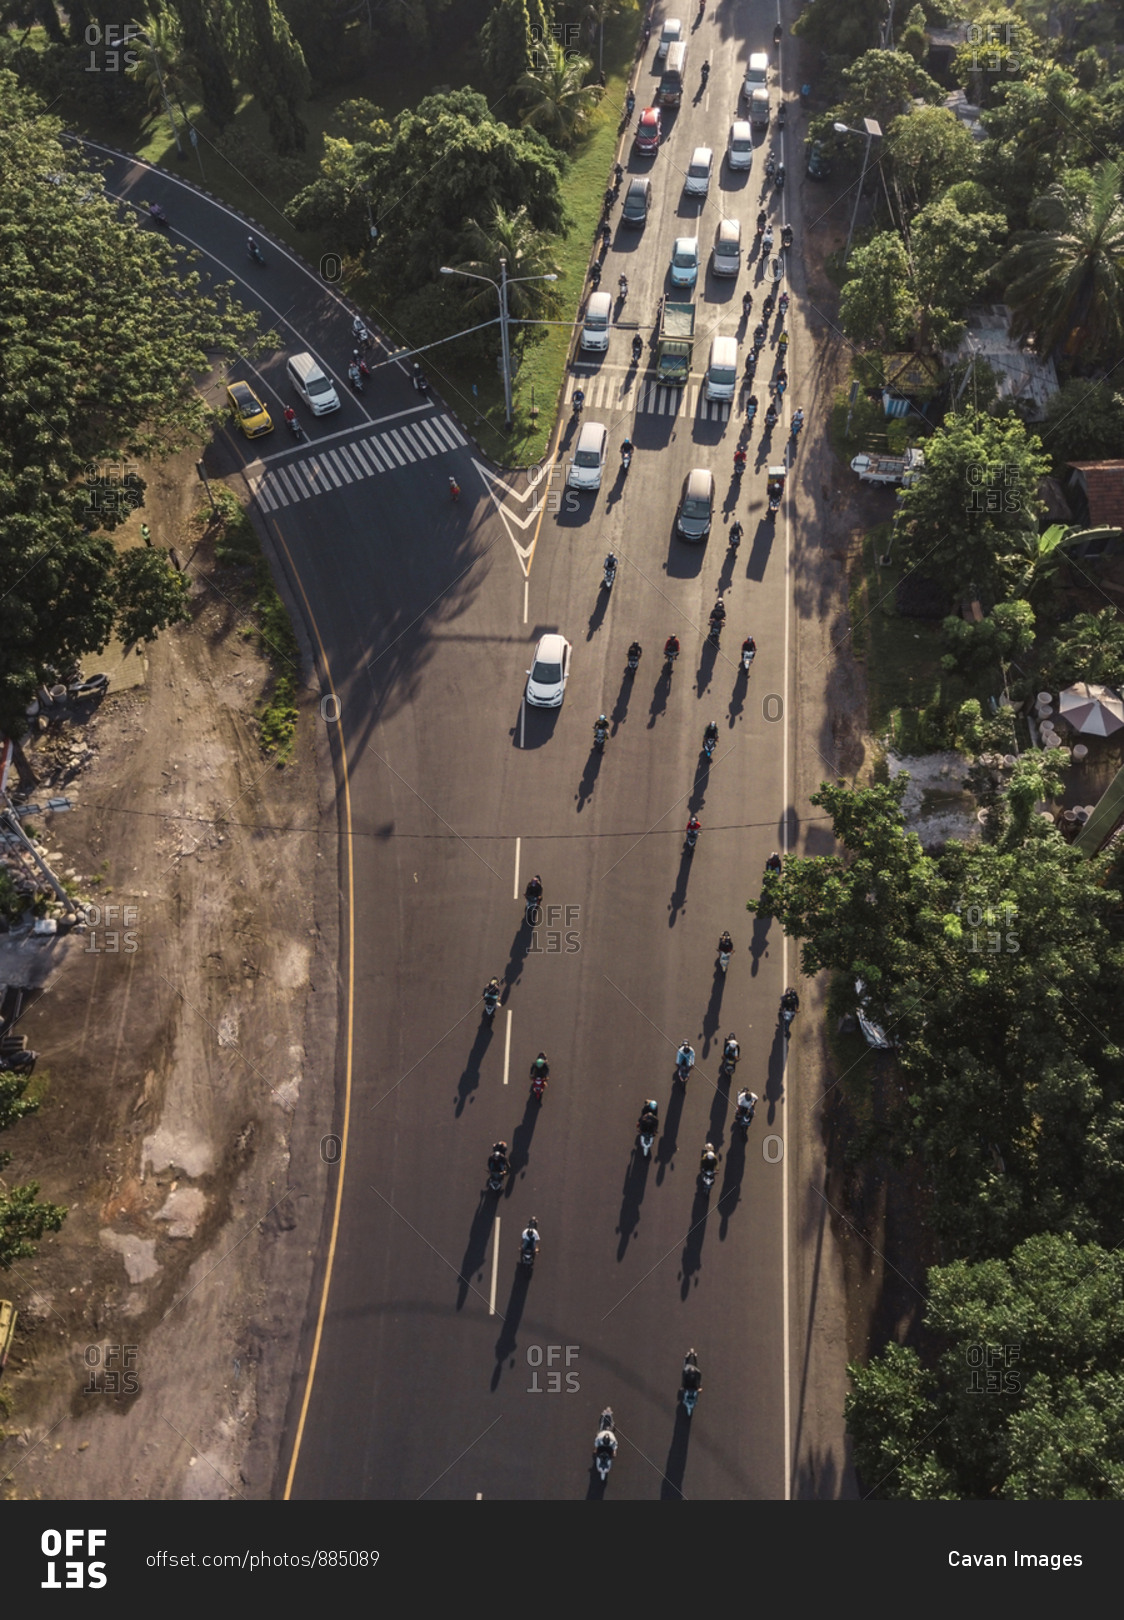 Aerial view of cars and motorbikes on the road